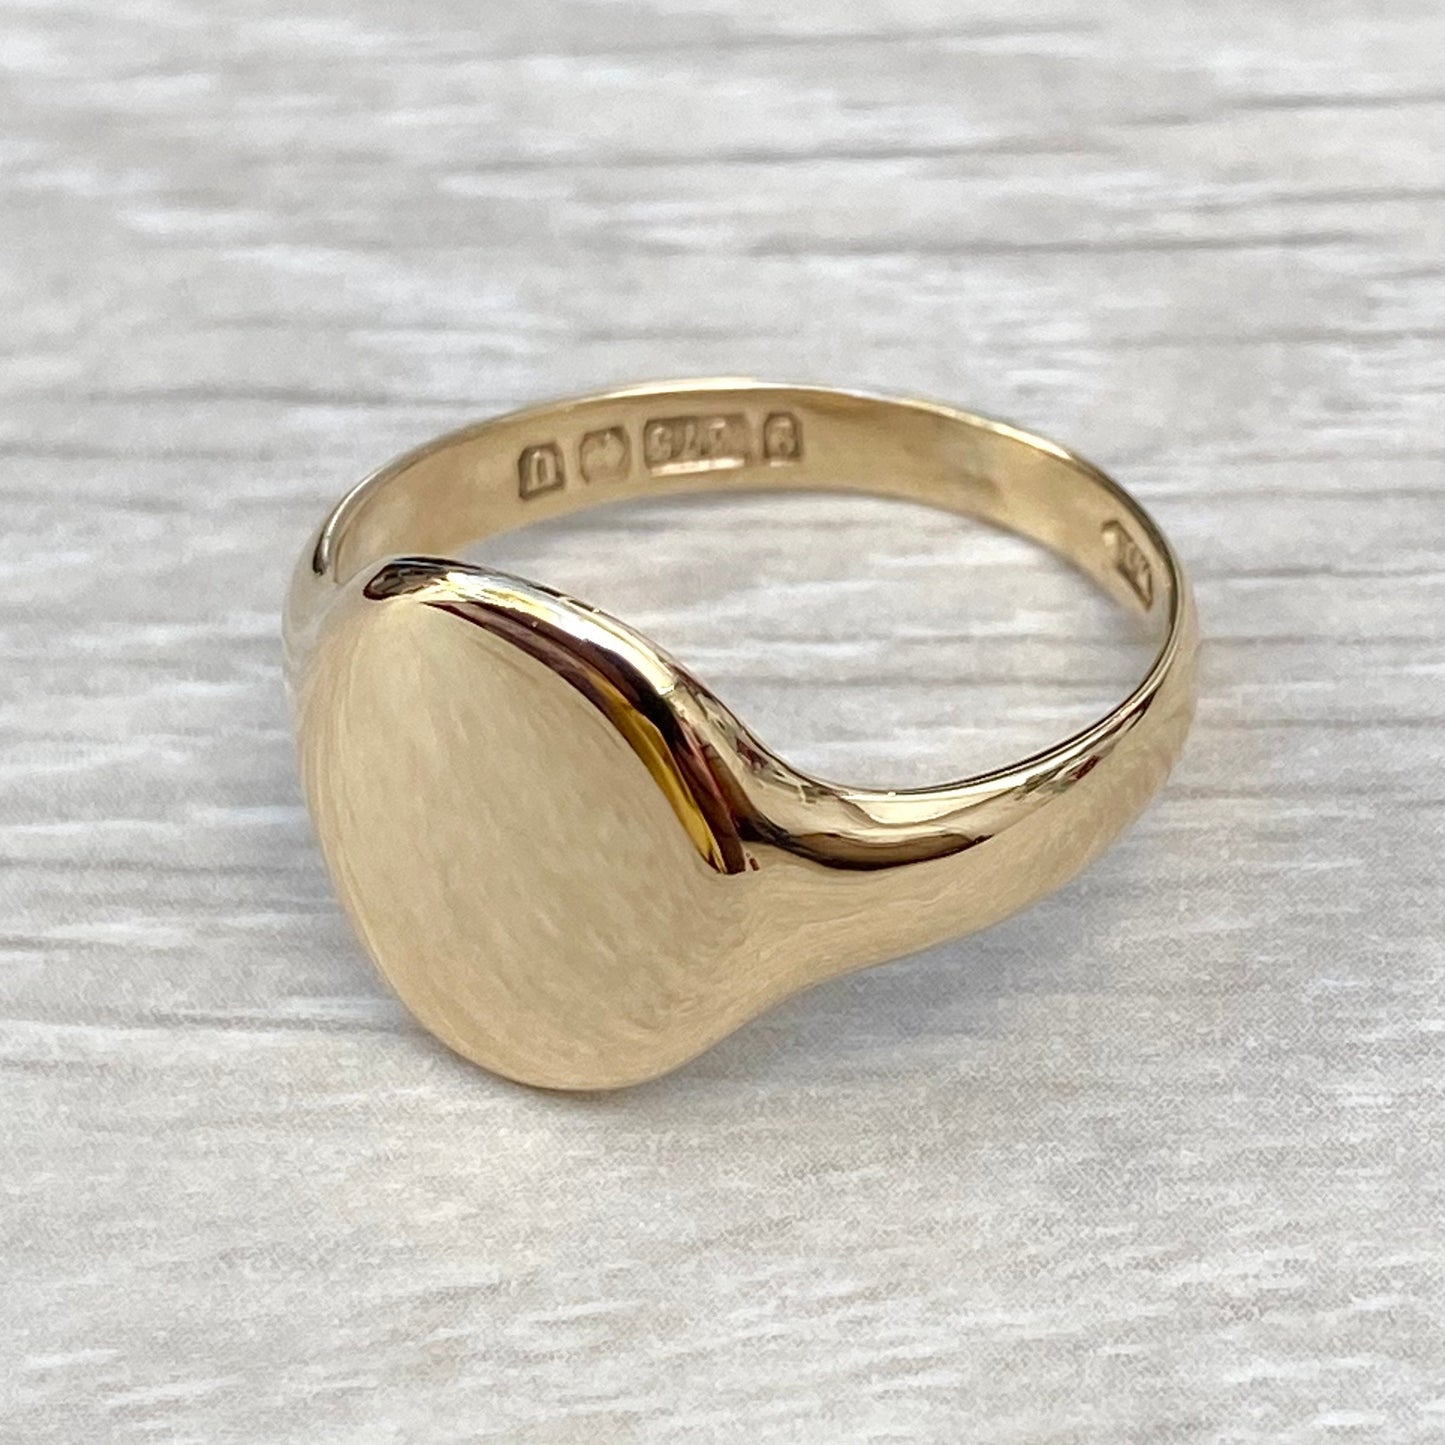 Vintage 9ct yellow gold classic oval signet ring